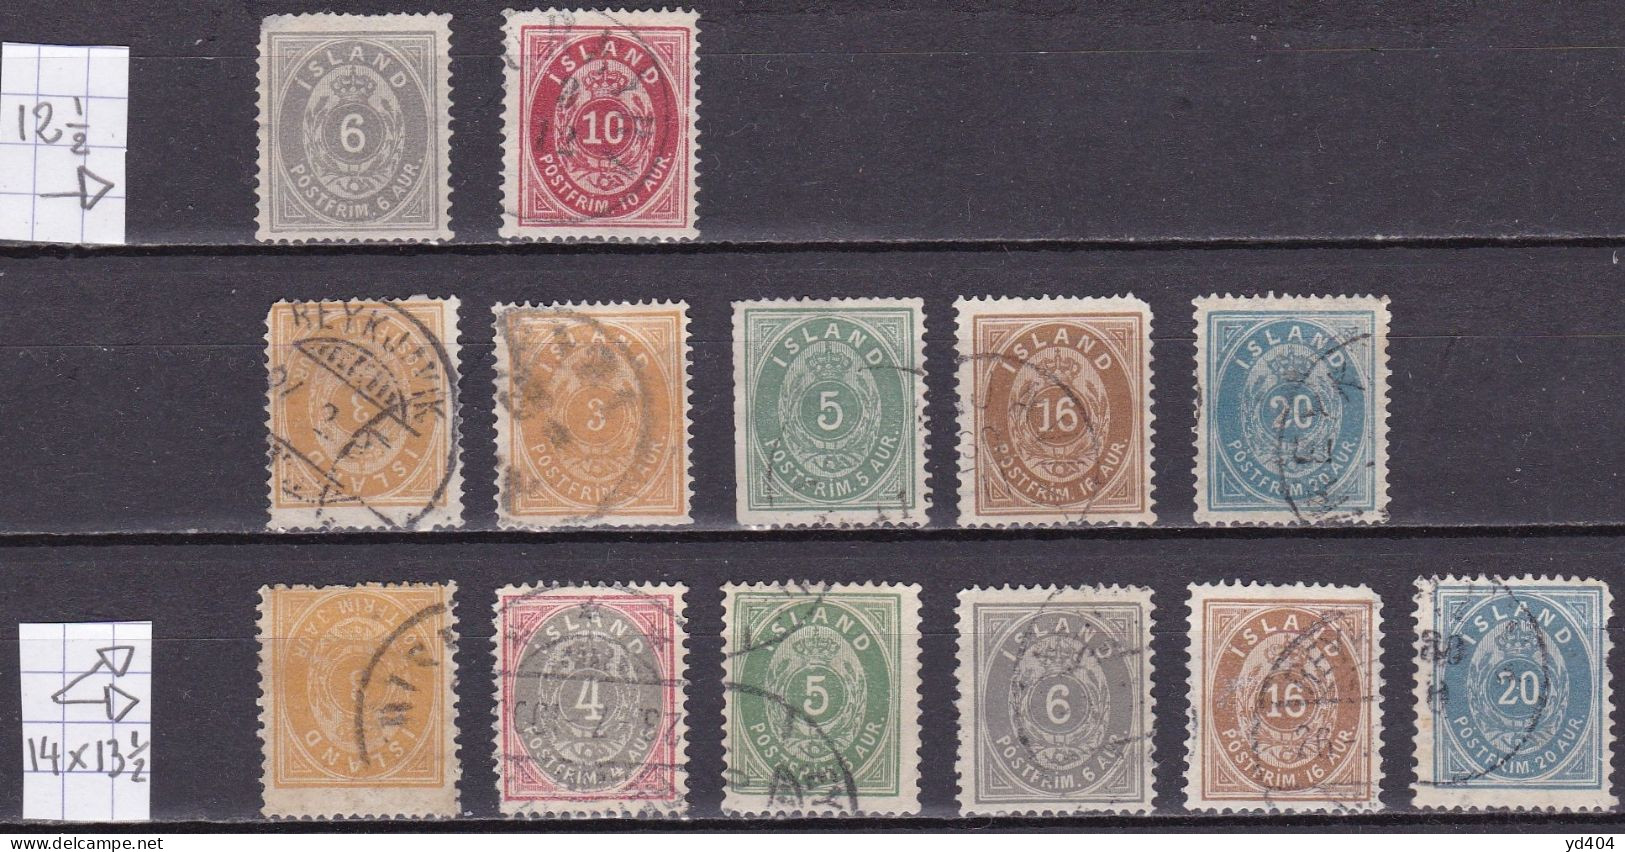 IS004 – ISLANDE – ICELAND – 1876/98 – NUMERAL VALUE LOT - SC # 10-28 USED 335 € - Gebraucht